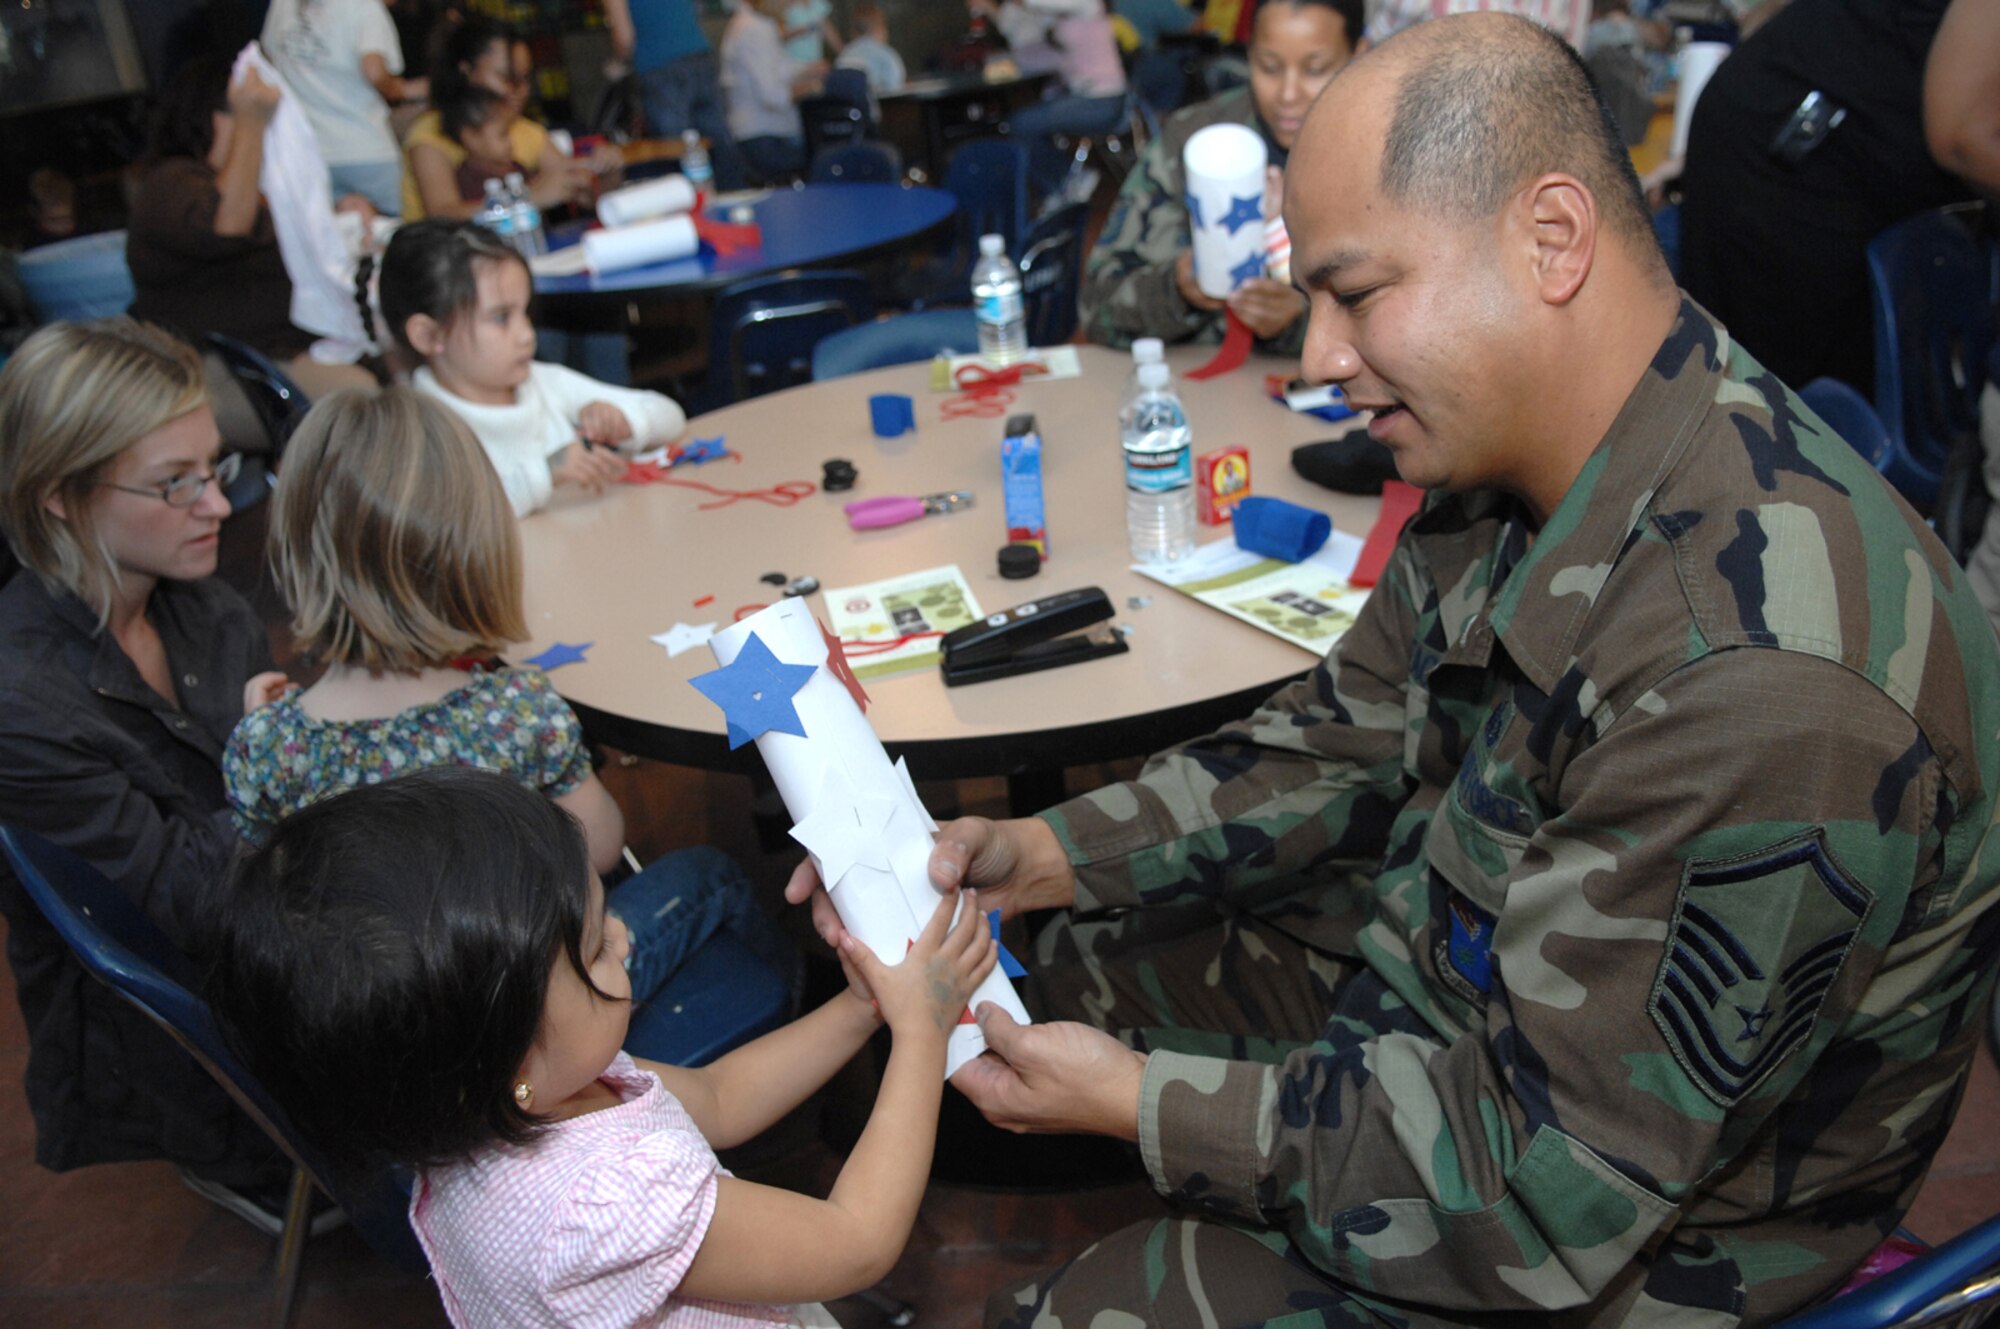 Master Sgt. Meril "Bob" Monteagudo, 99th MSS, Family Readiness NCO and daughter Kaelynn Monteagudo, 3, create red, white and blue "wind socks" Nov. 2 at the Lied Discovery Childrens Museum in Las Vegas.  more than 25 families attended the event at the museum, which offered military families a discounted admission price, in honor of military family month that is being celebrated in Nov. (U.S. Air Force photo by Senior Airman Larry Reid jr.)